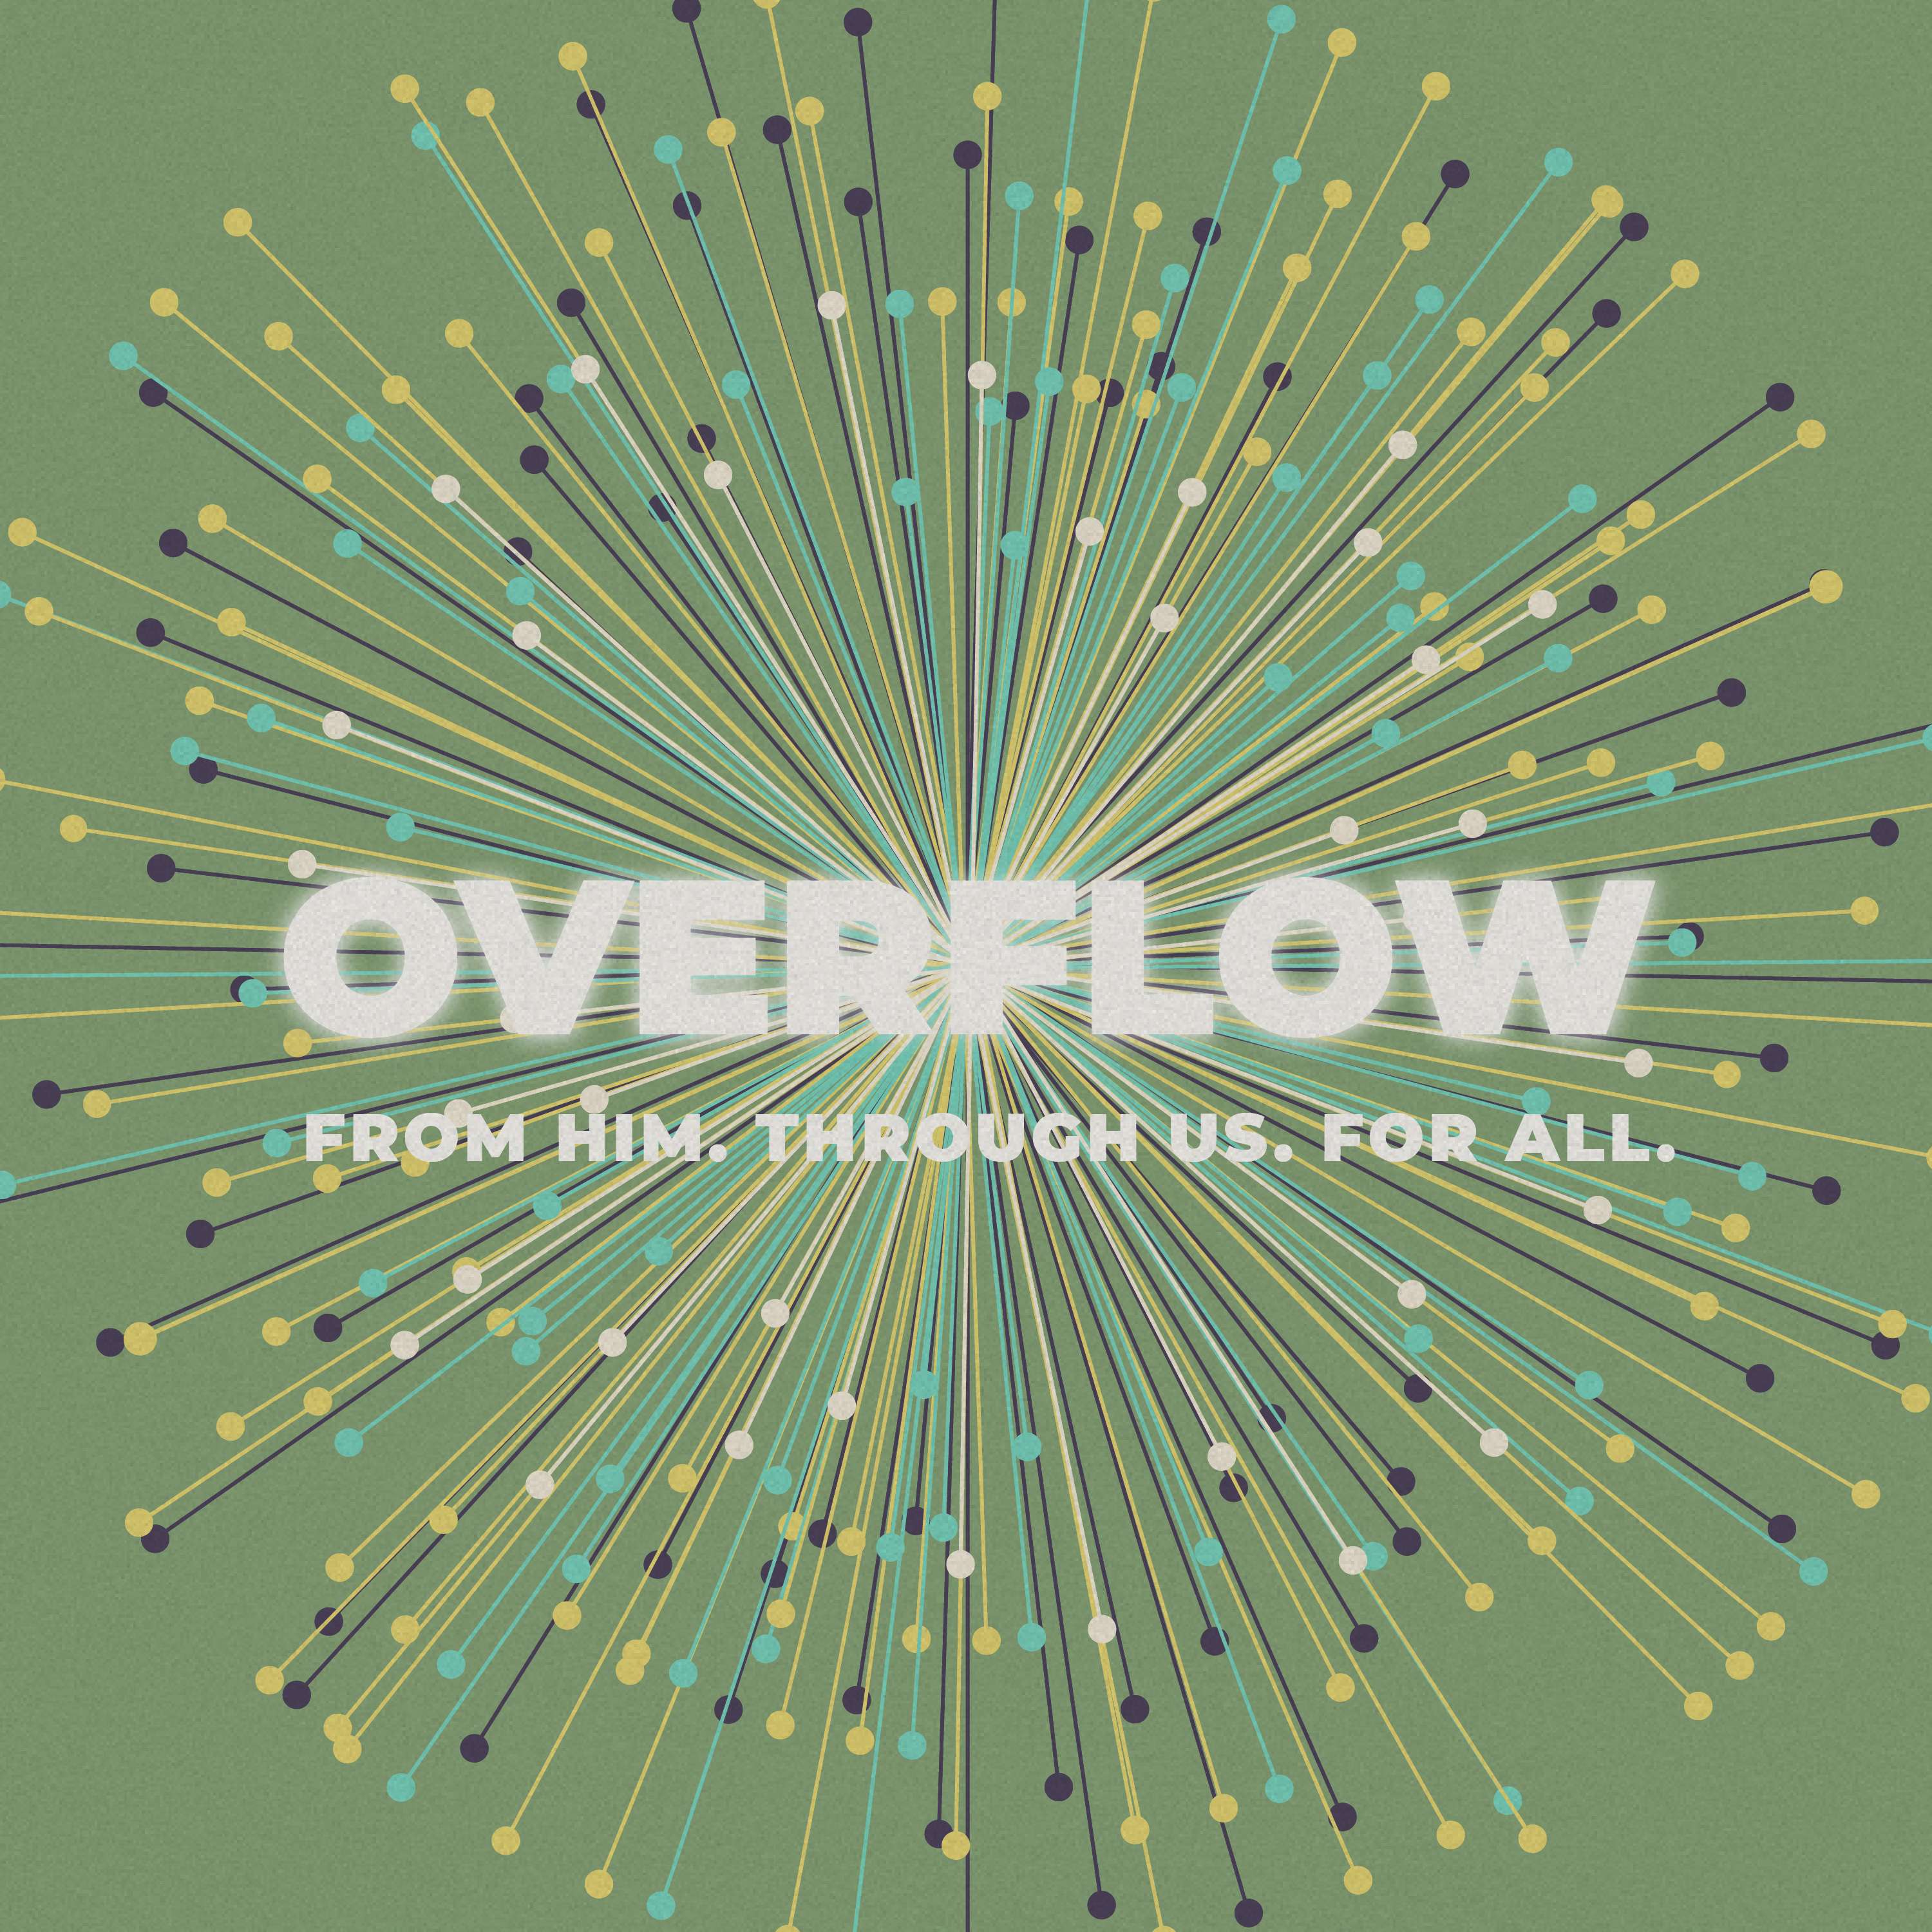 Overflow: From Him, Through Us, For All: Giving and Ability - Part 5 - Woodside Bible Church